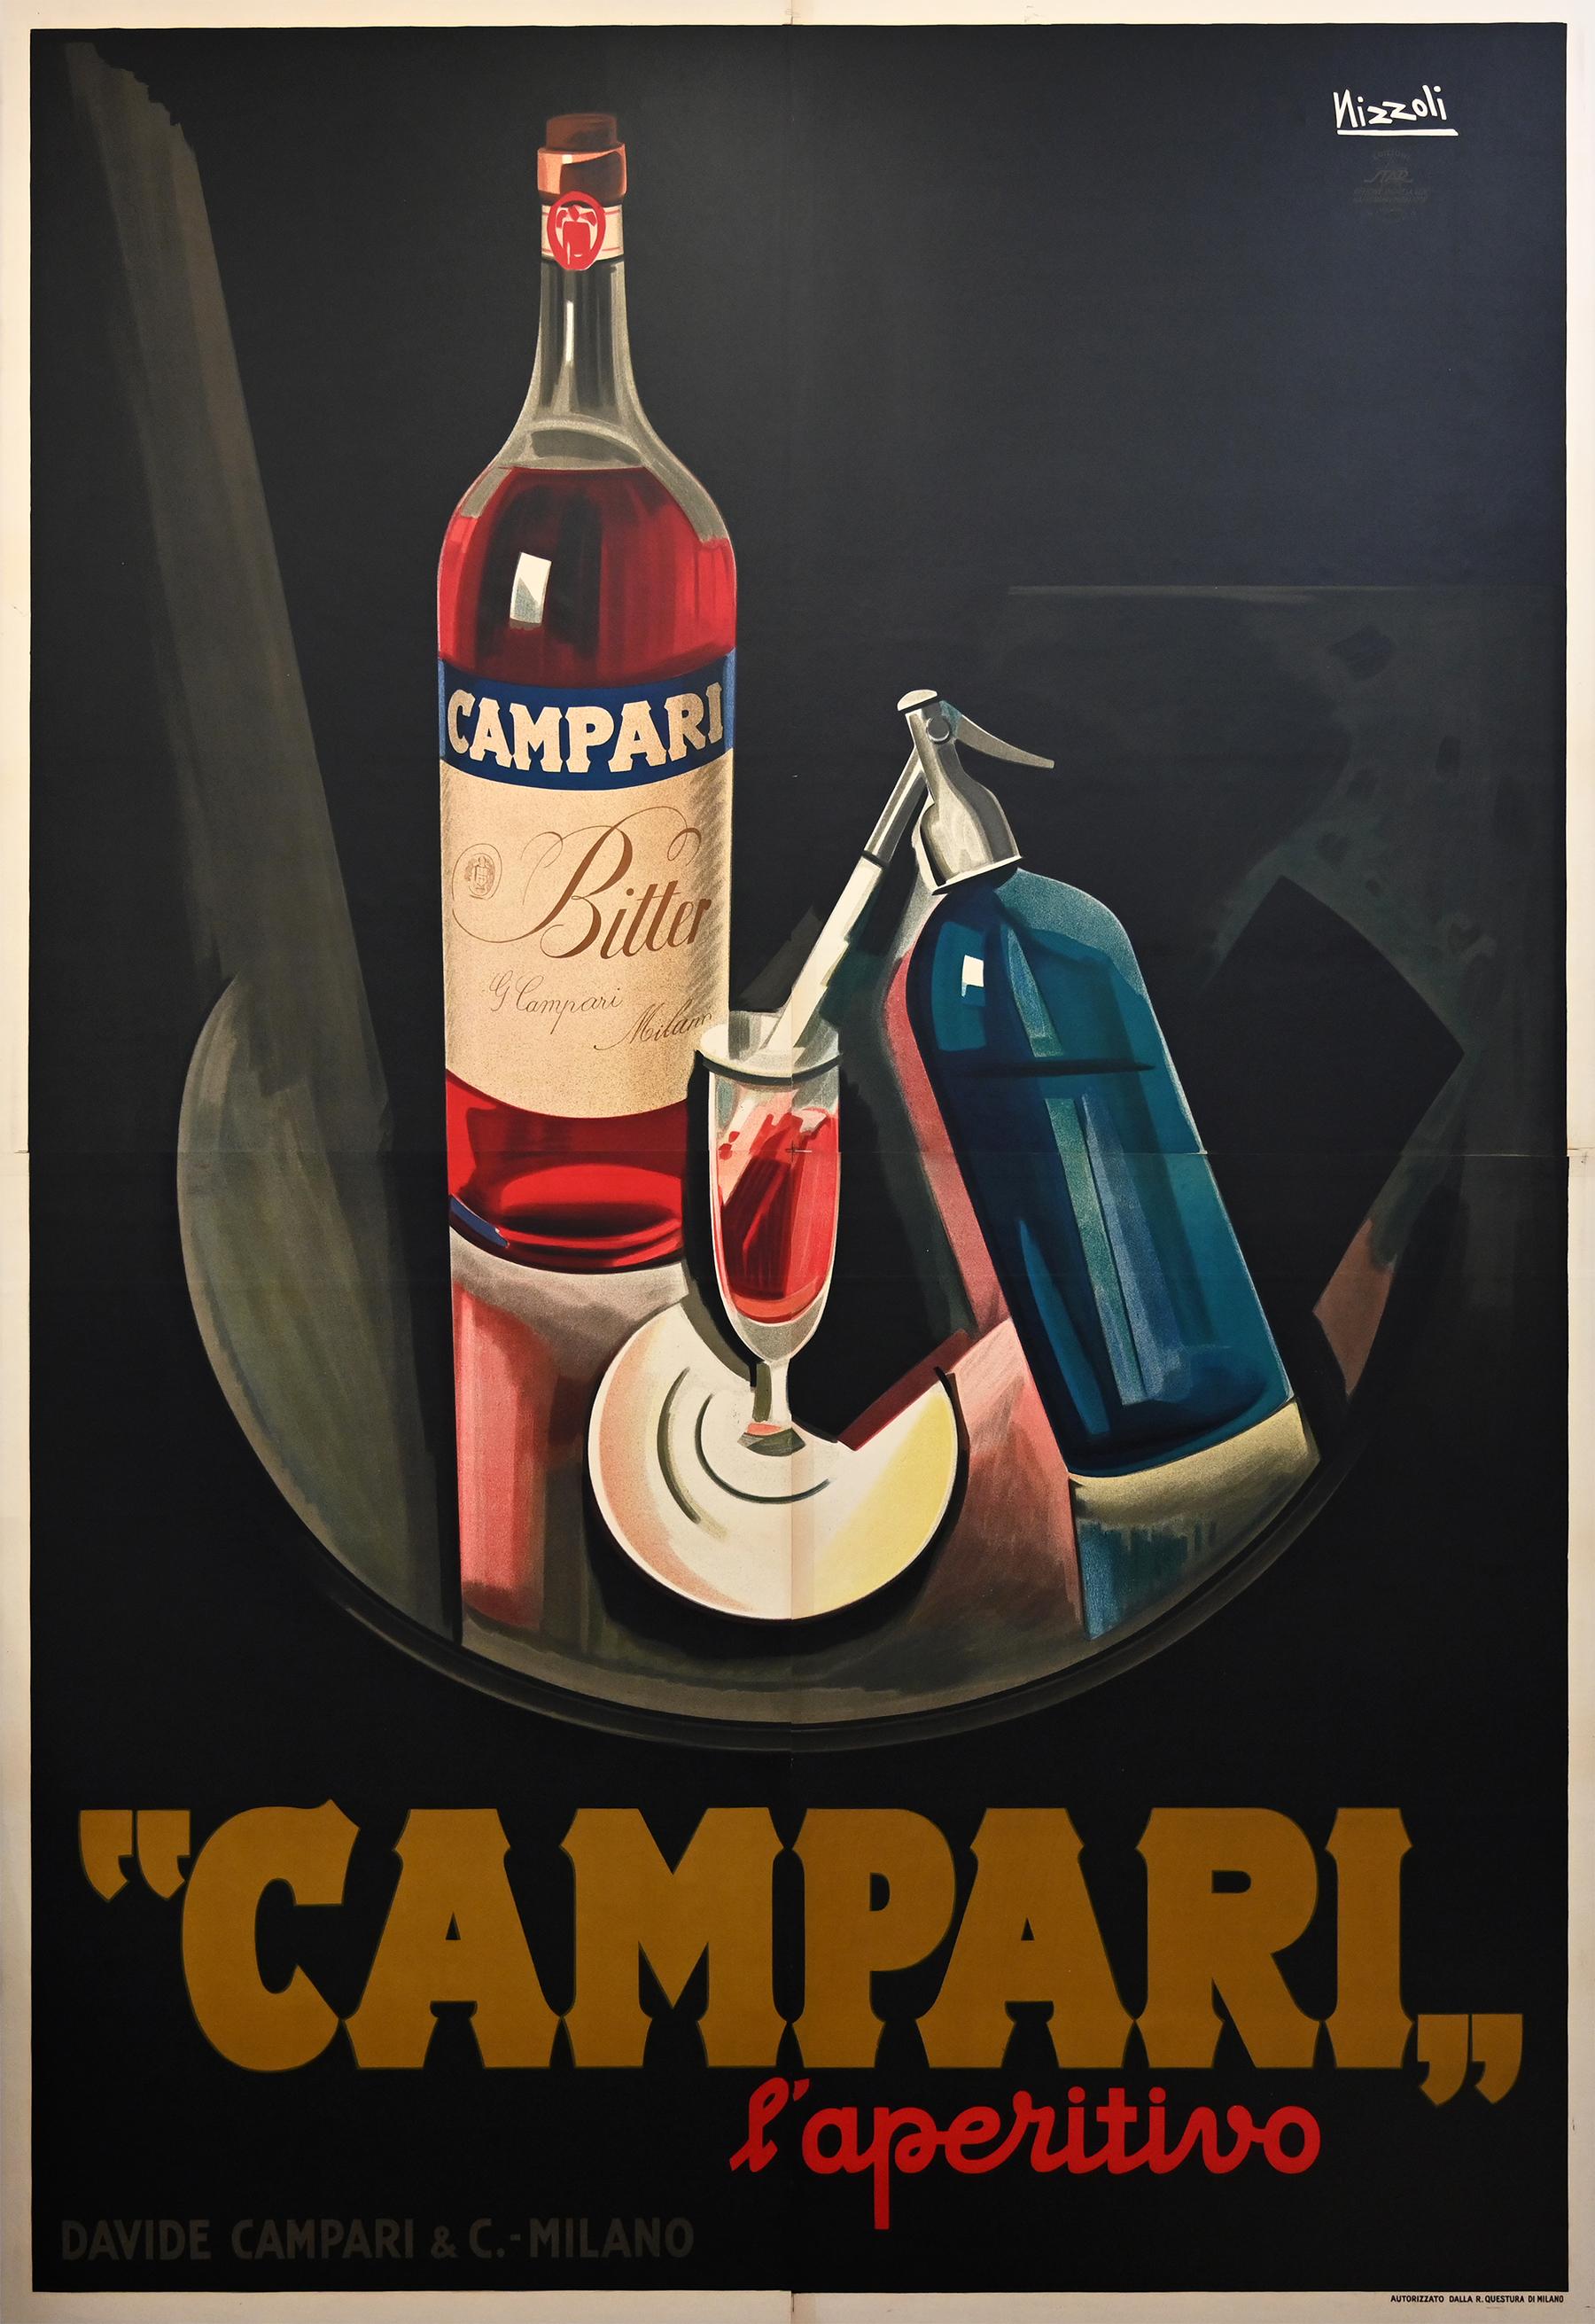 This beautiful poster by Marcello Nizzoli features a black background, with a bright red Campari bottle and glass in the center of the poster. The design is simple and effective in this large scale poster, leaving no guesswork for the viewers of